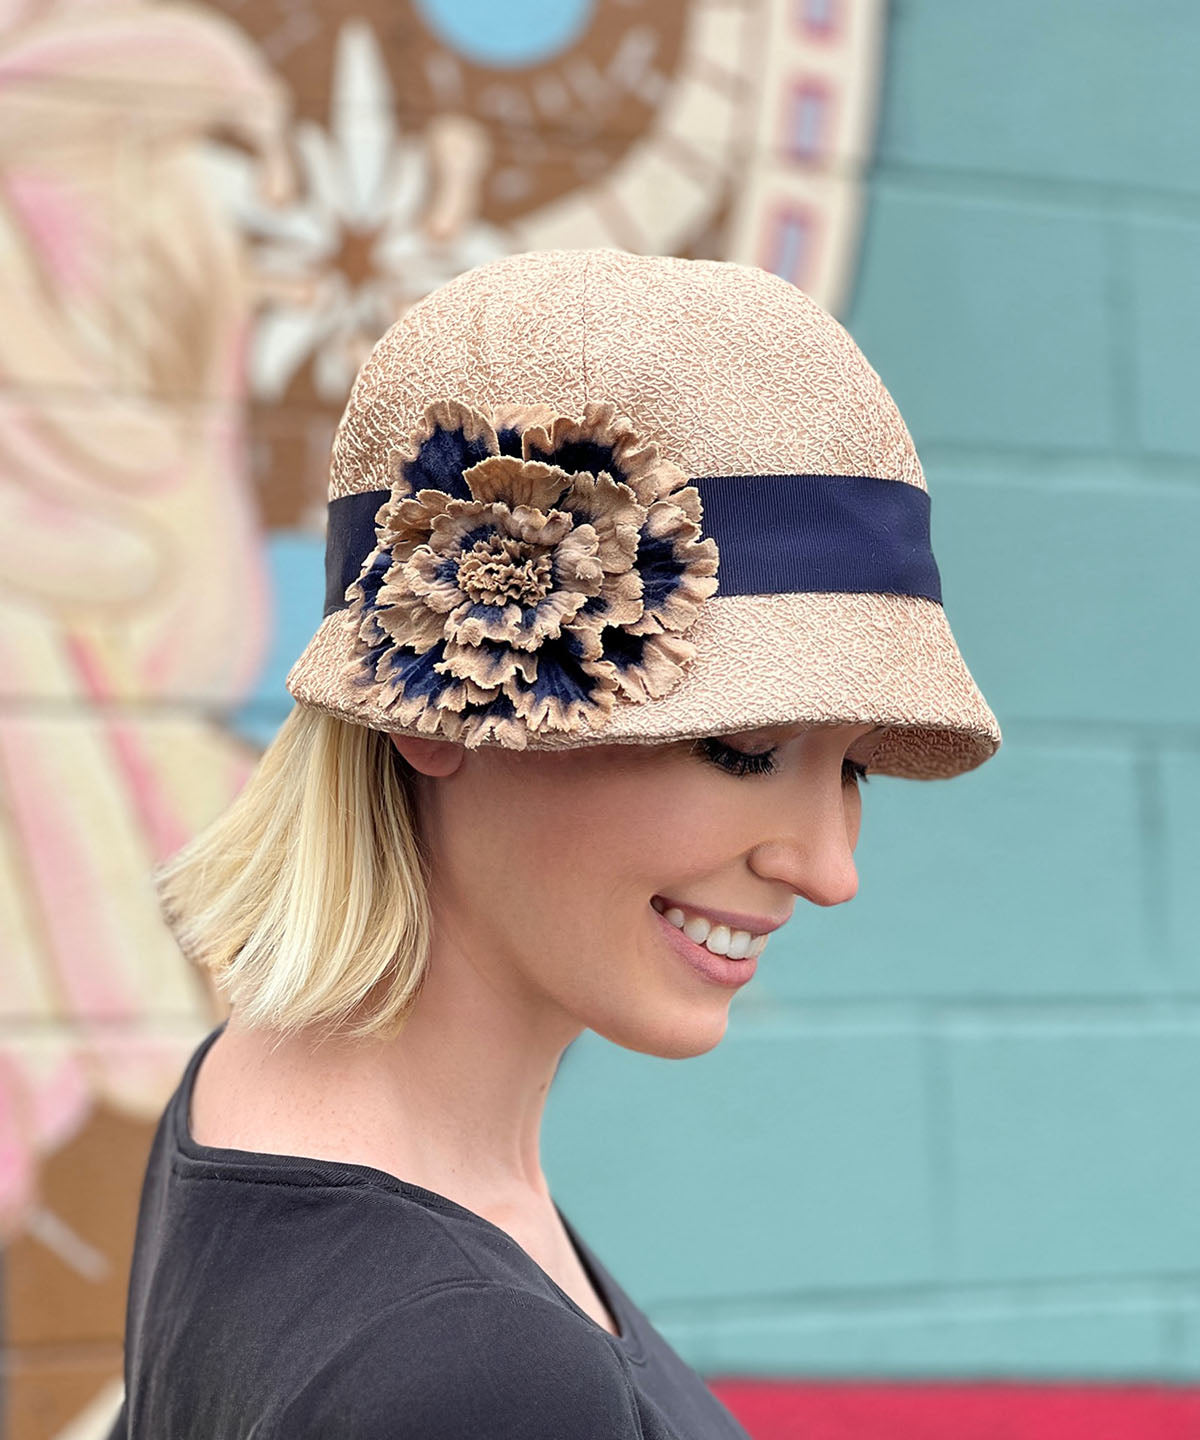 Grace Cloche Style Hat Tumbleweed in Champagne with Navy Grosgrain featuring Large Custom Flower Brooch | By Pandemonium Millinery | Handmade in Seattle WA USA